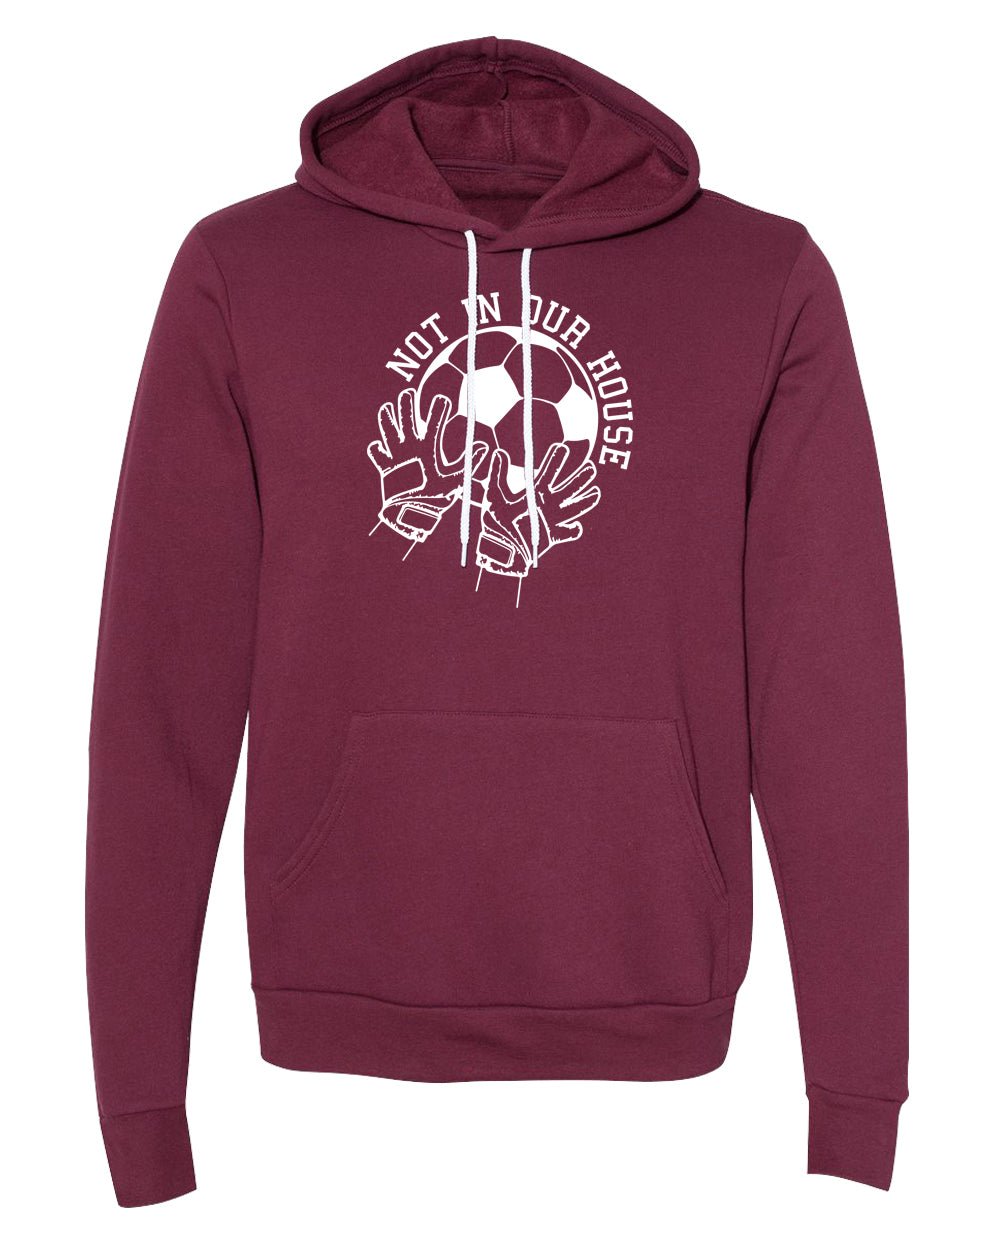 Not in Our House Unisex Soccer Hoodies - Mato & Hash